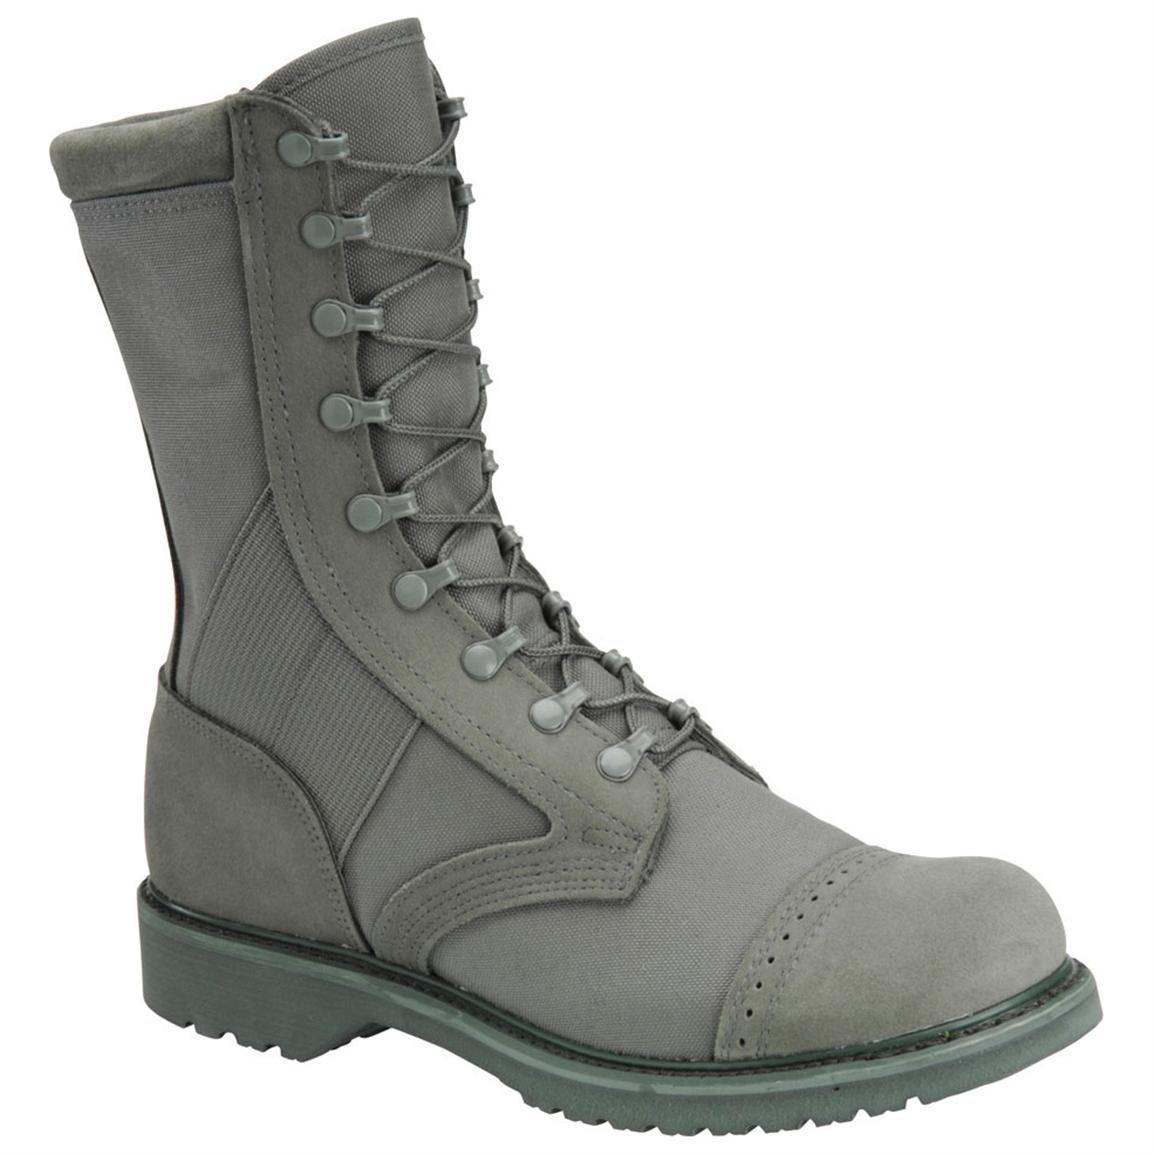 Corcoran Army Boots - Army Military